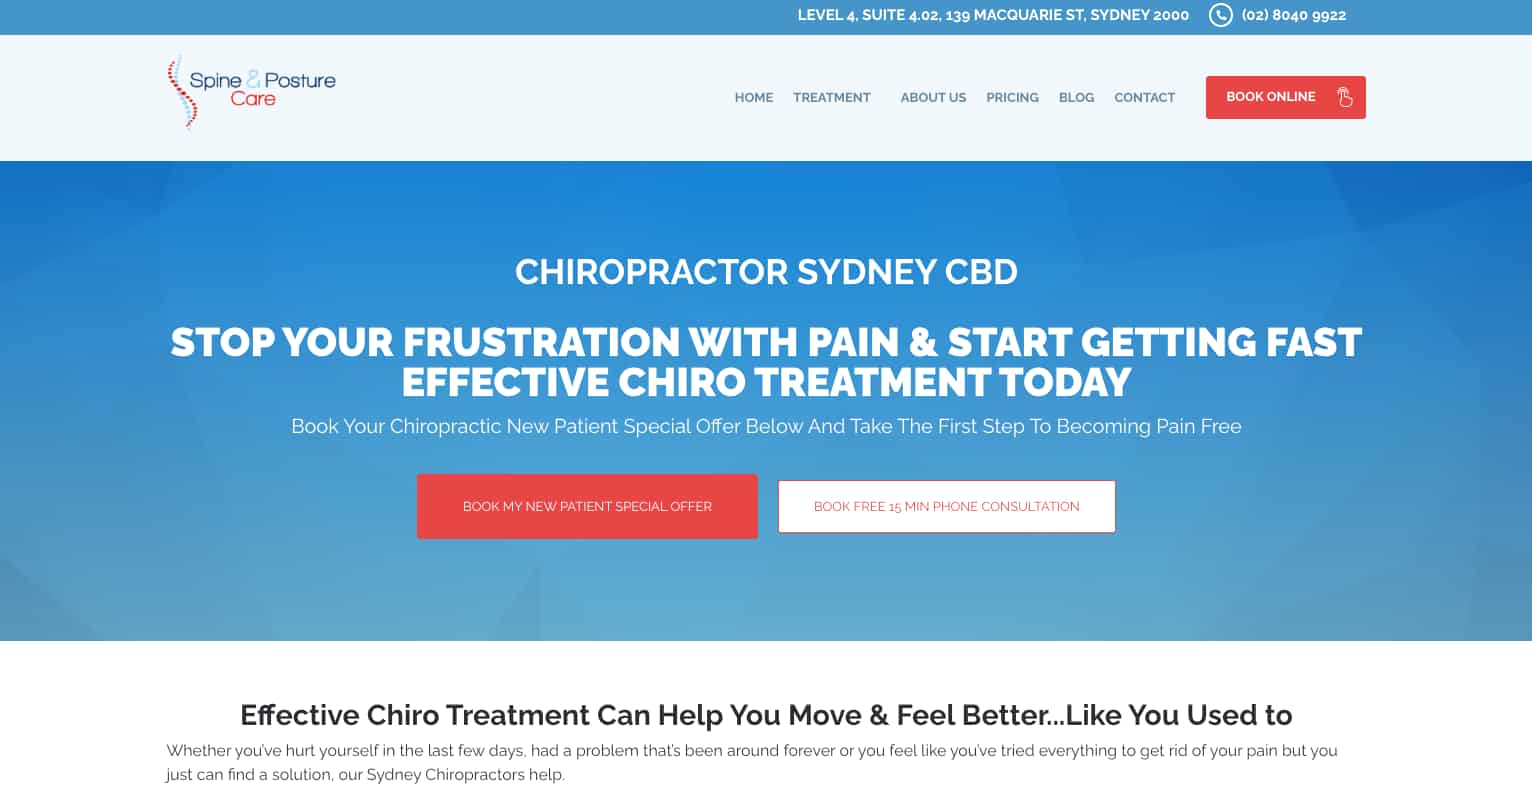 Spine and Posture Care Chiropractor Sydney